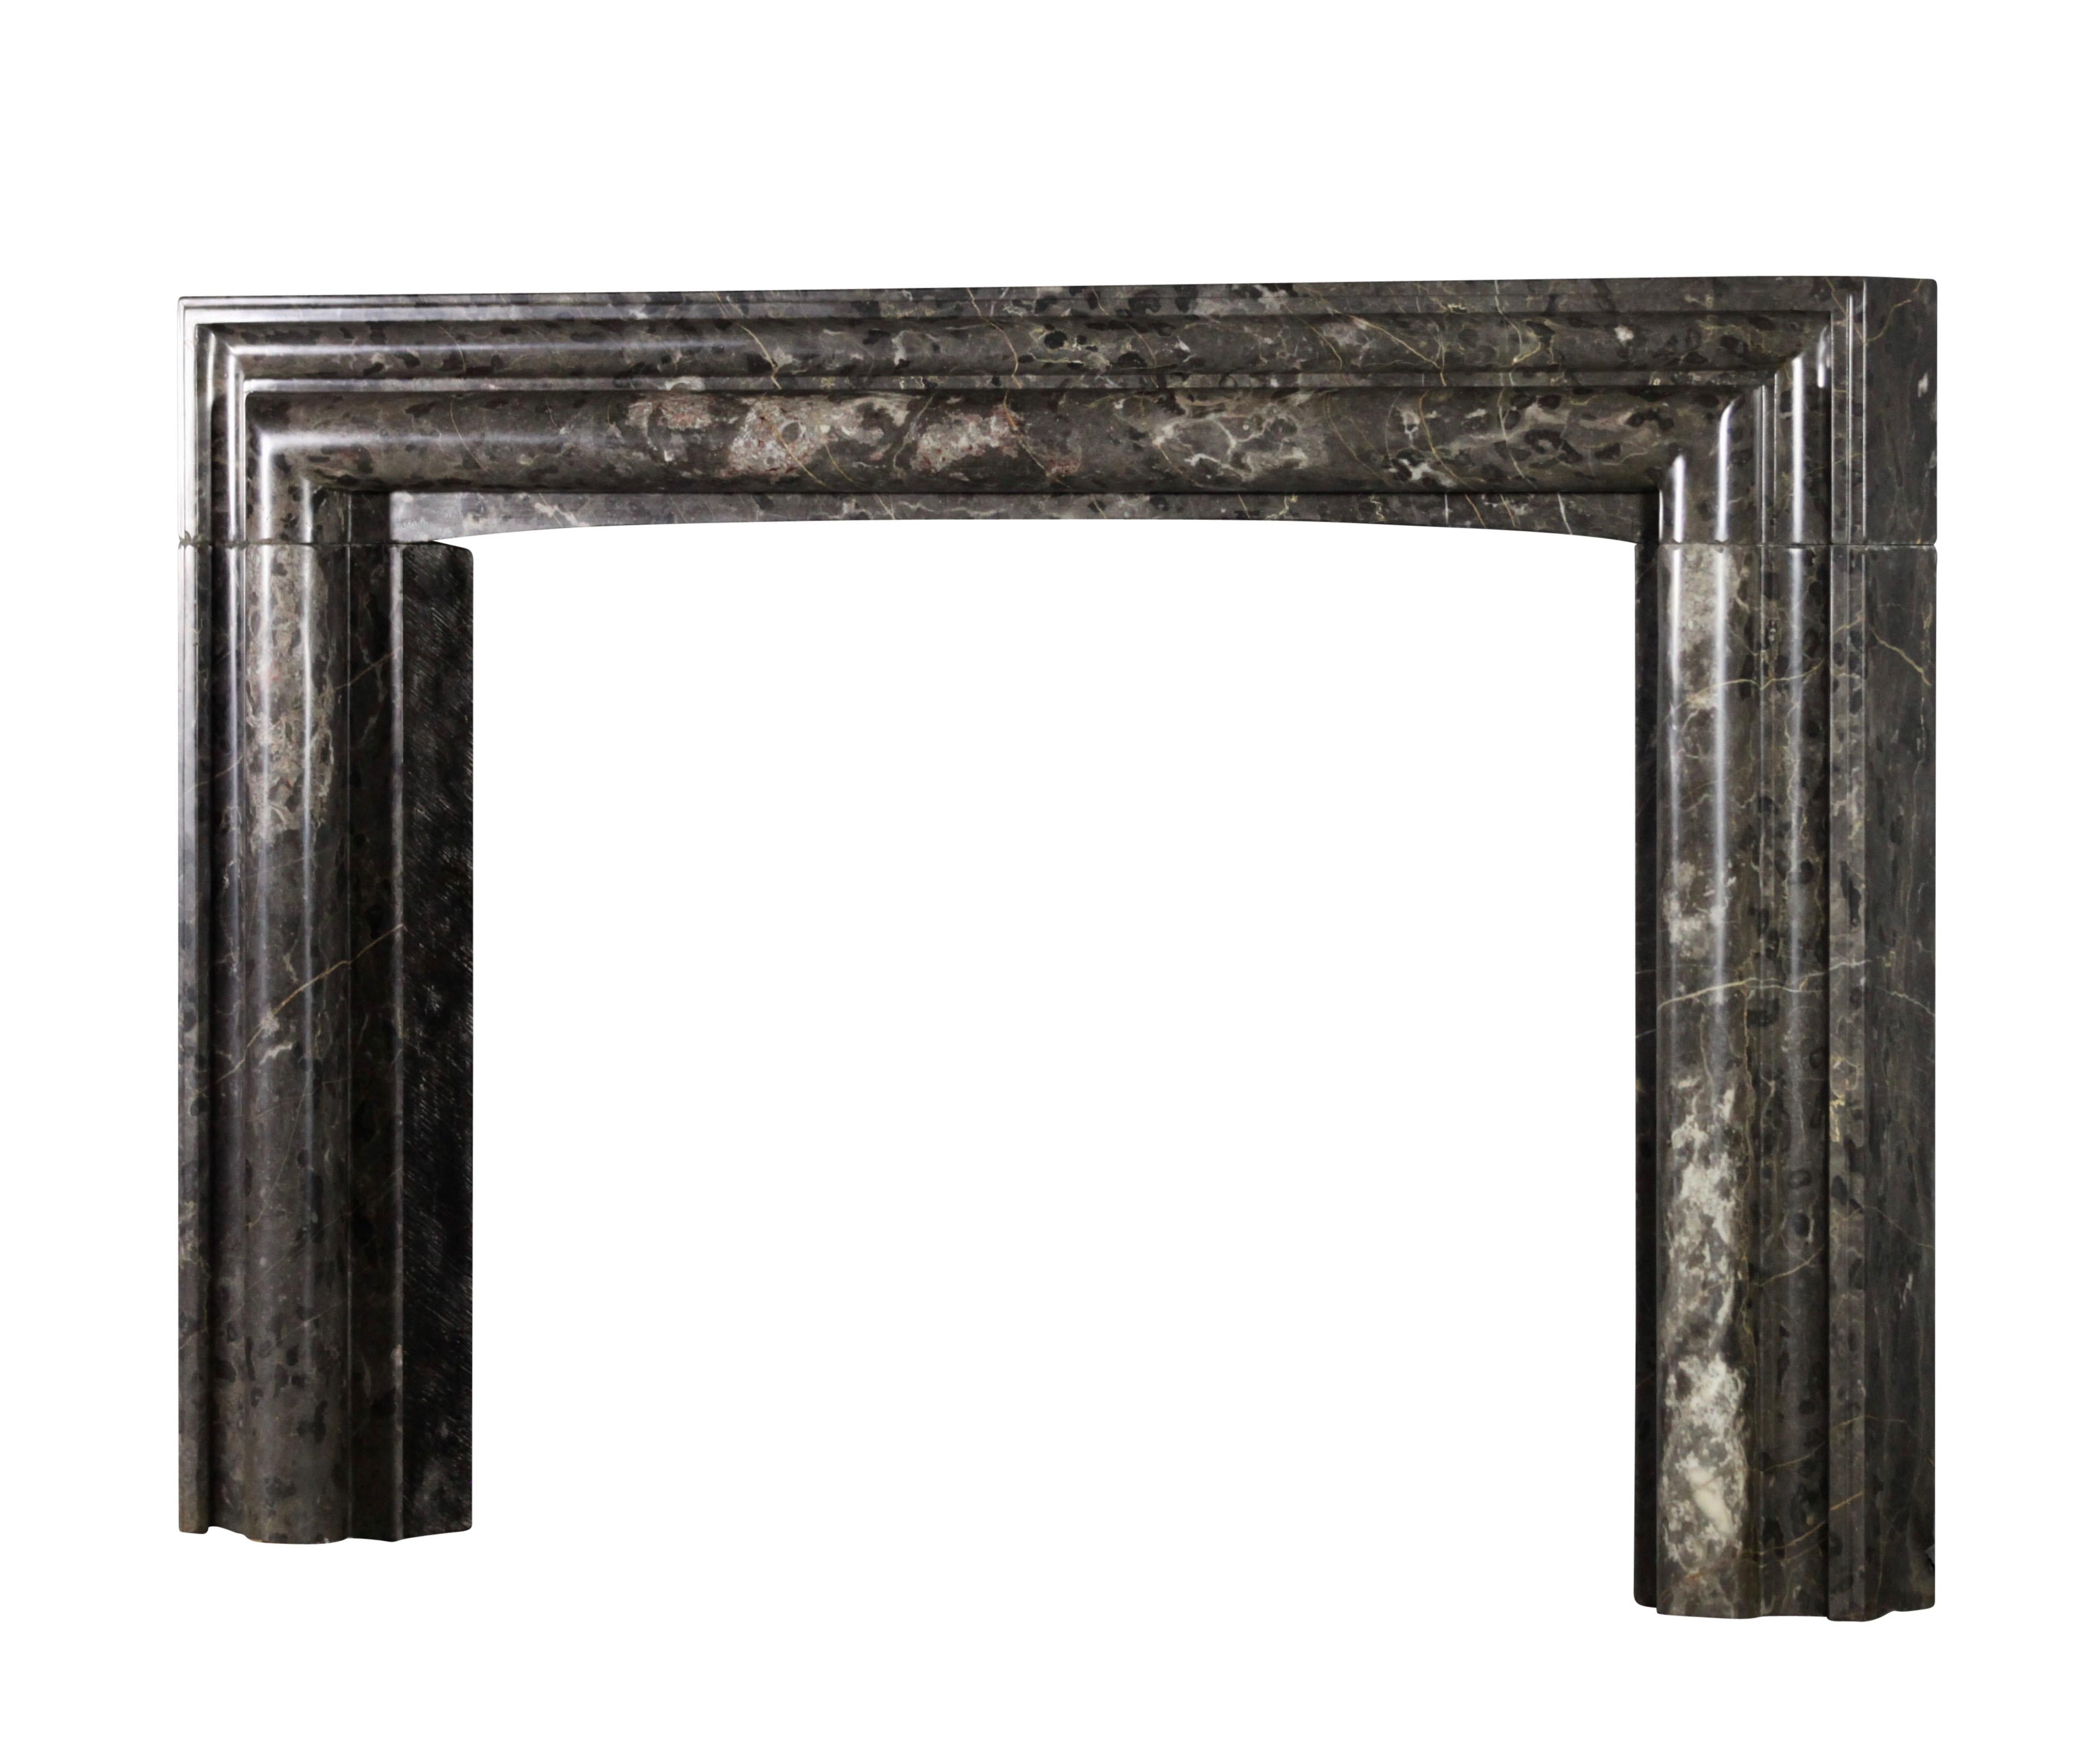 This original vintage marble fireplace surround is one of a collection of 4 that was reclaimed out of a Brussels great Maison de Maitre house of late 19th century. The colour pallet of this marble blend perfectly in different interior design styles.